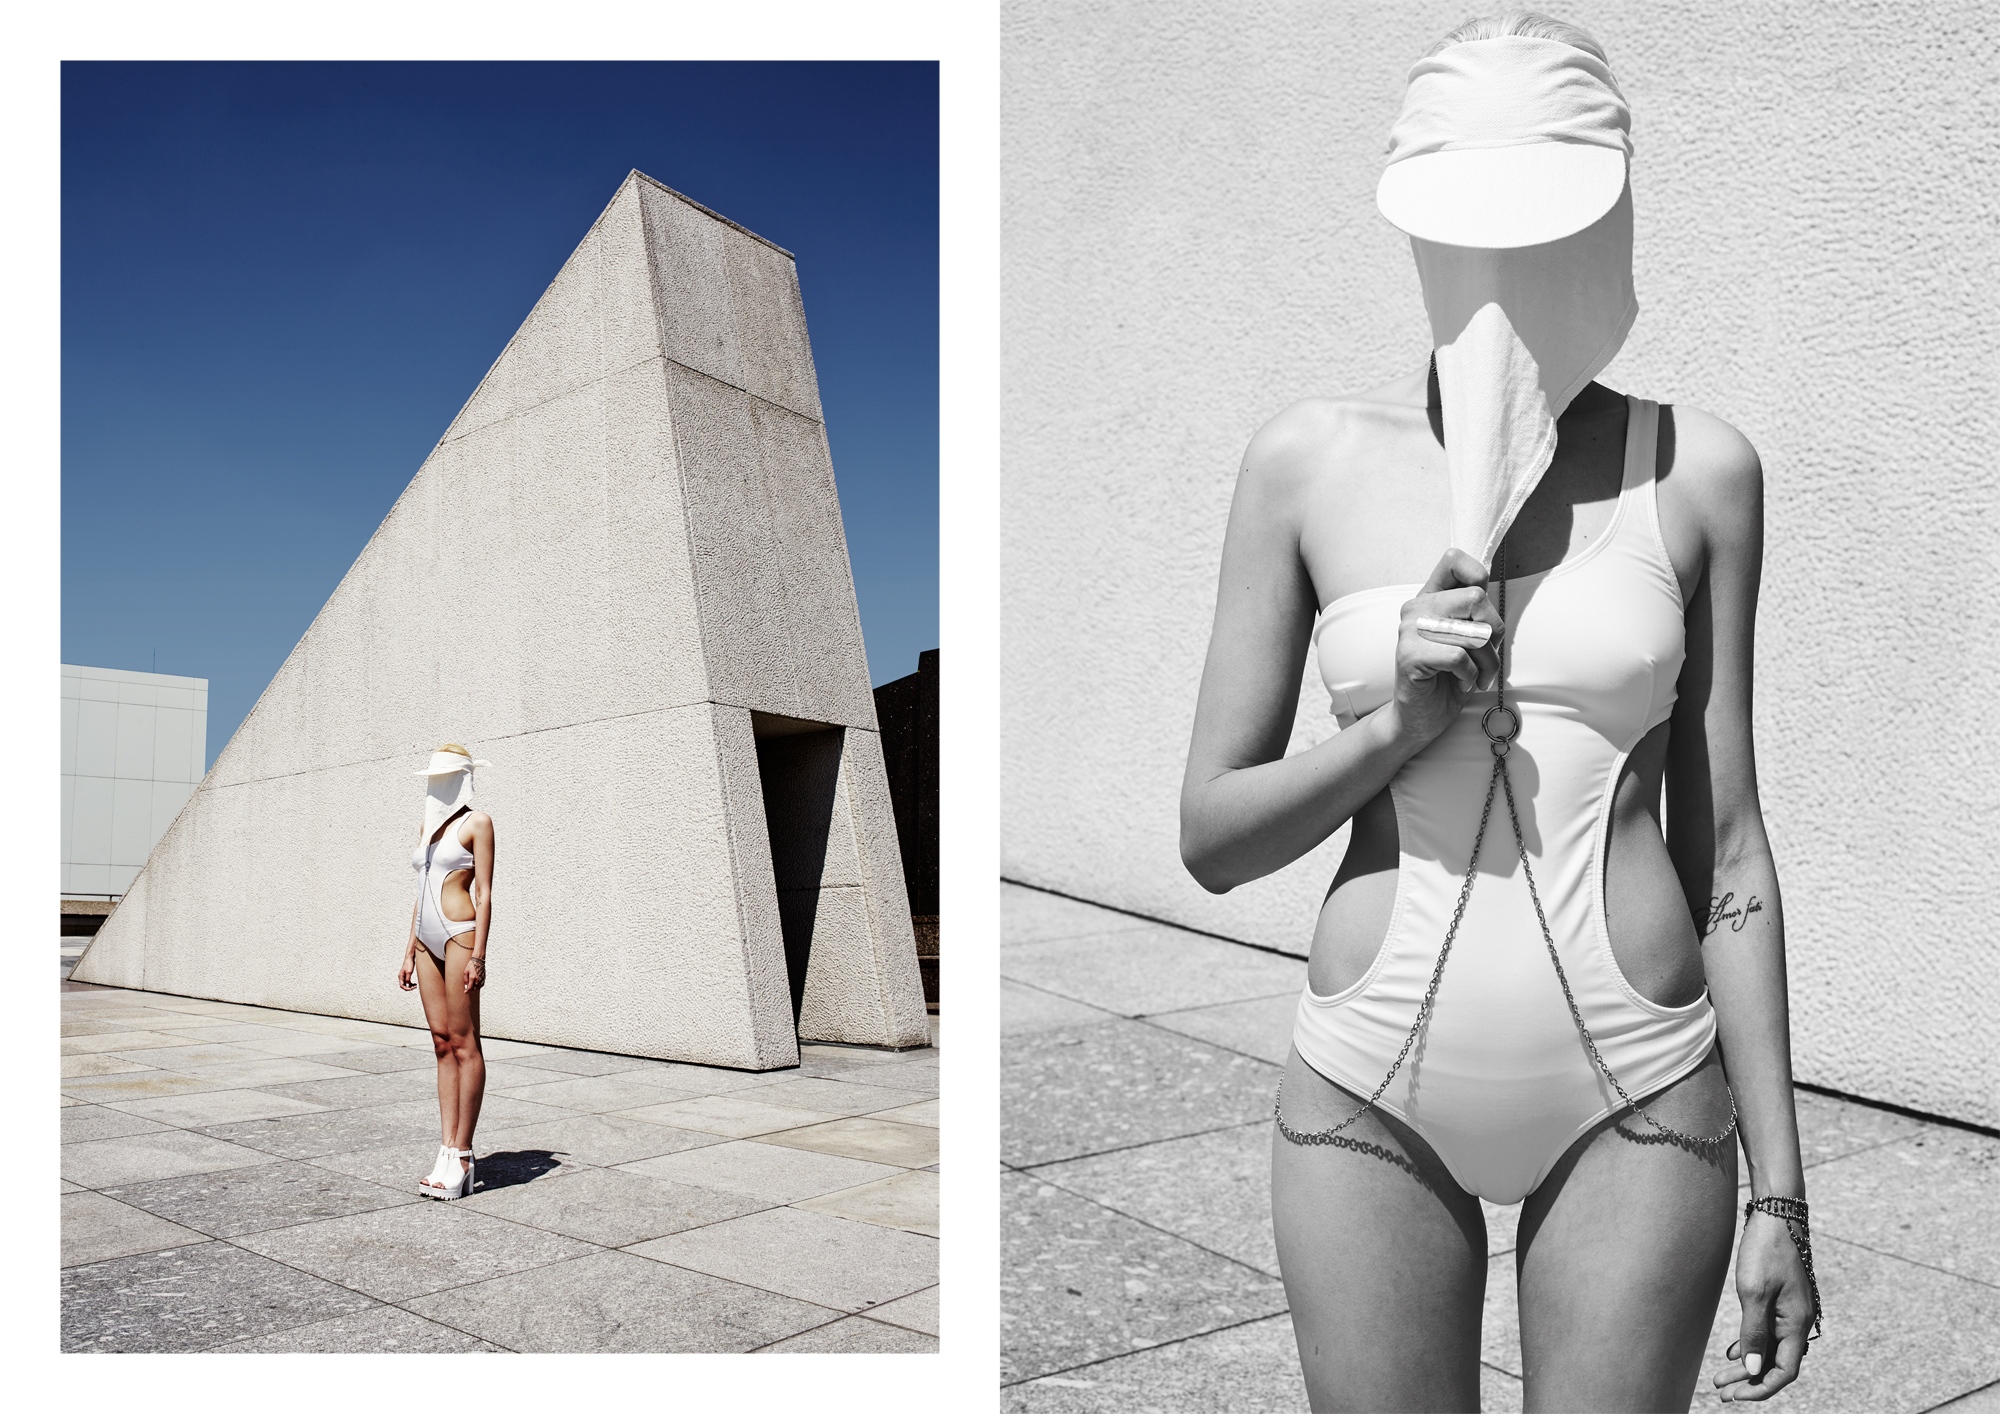 White Therapy by Santiago Perez for CHASSEUR MAGAZINE